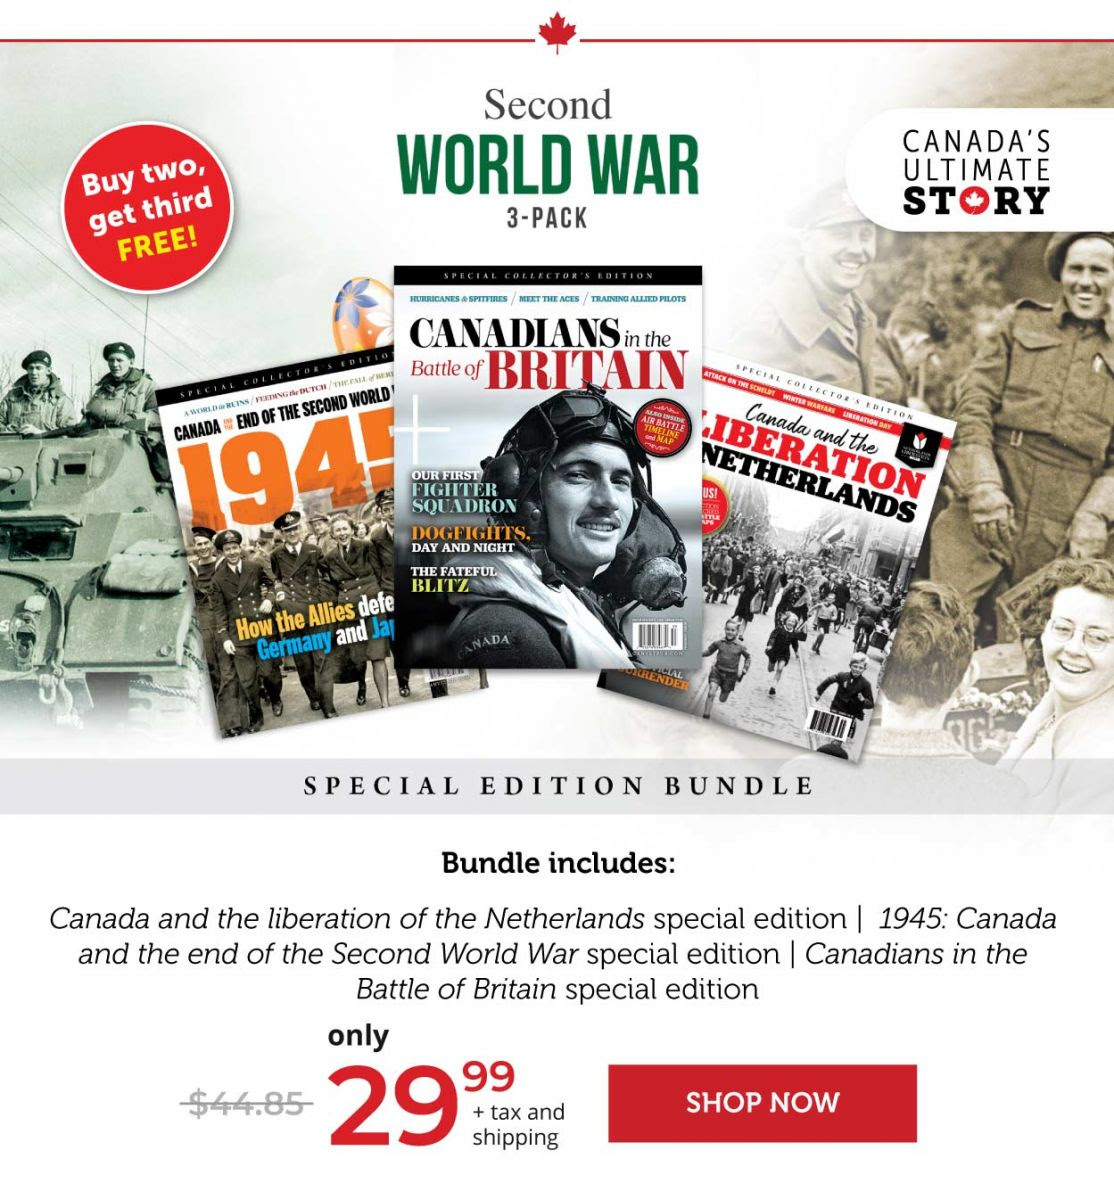 Second World War 3-pack – Buy two, get third FREE!